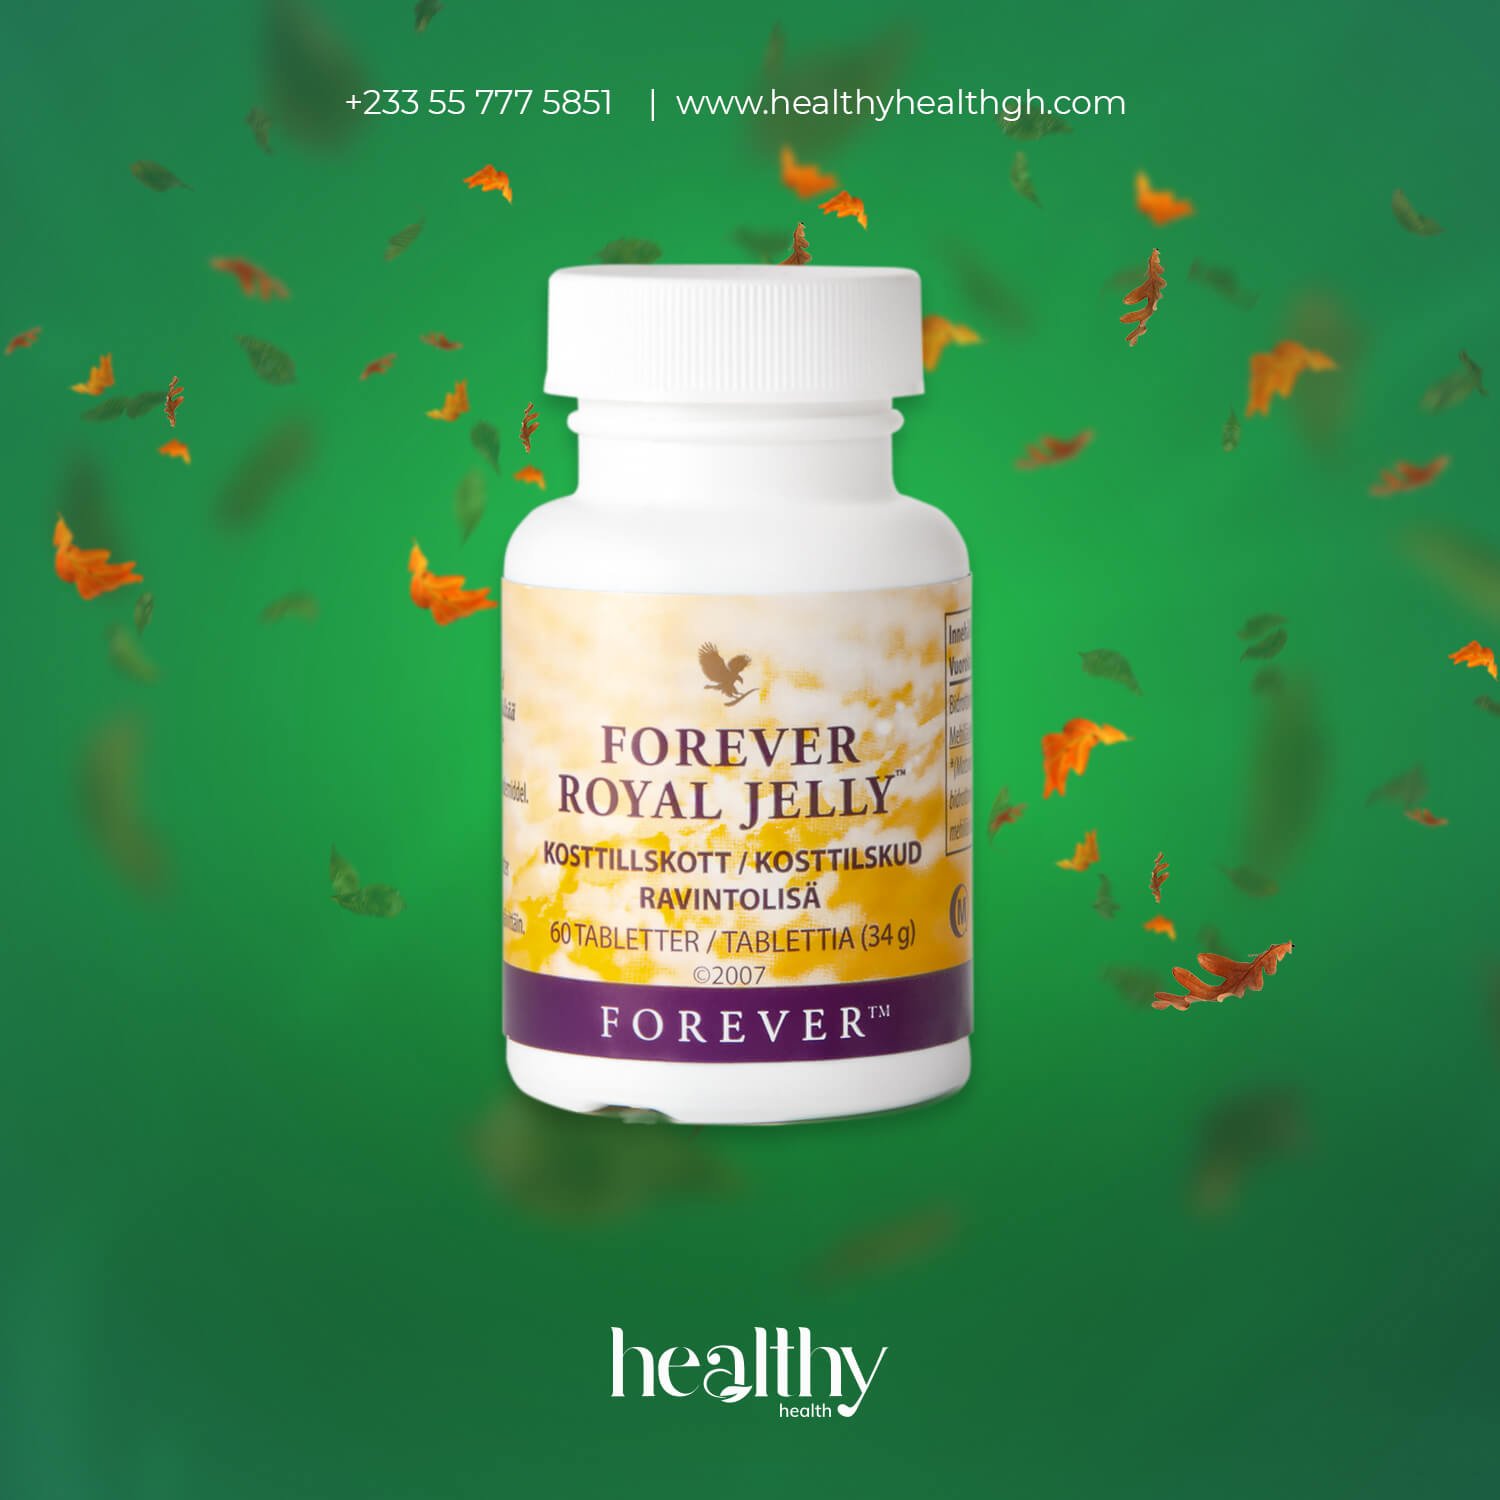 BENEFITS OF FOREVER ROYAL JELLY